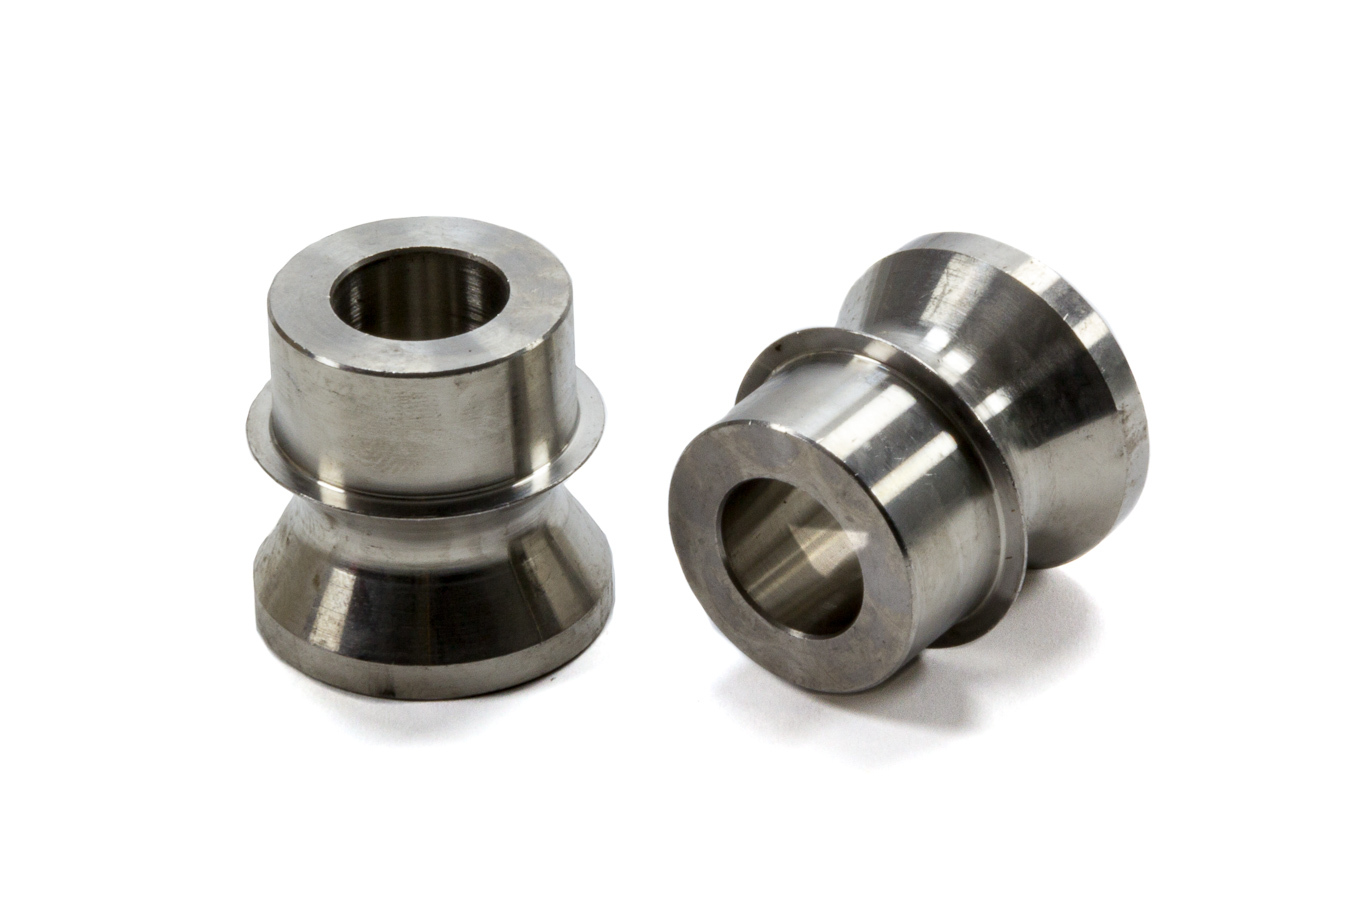 FK Rod Ends 12-10HB Rod End Bushing, 3/4 to 5/8 in Bore, High Misalignment, Steel, Natural, Pair